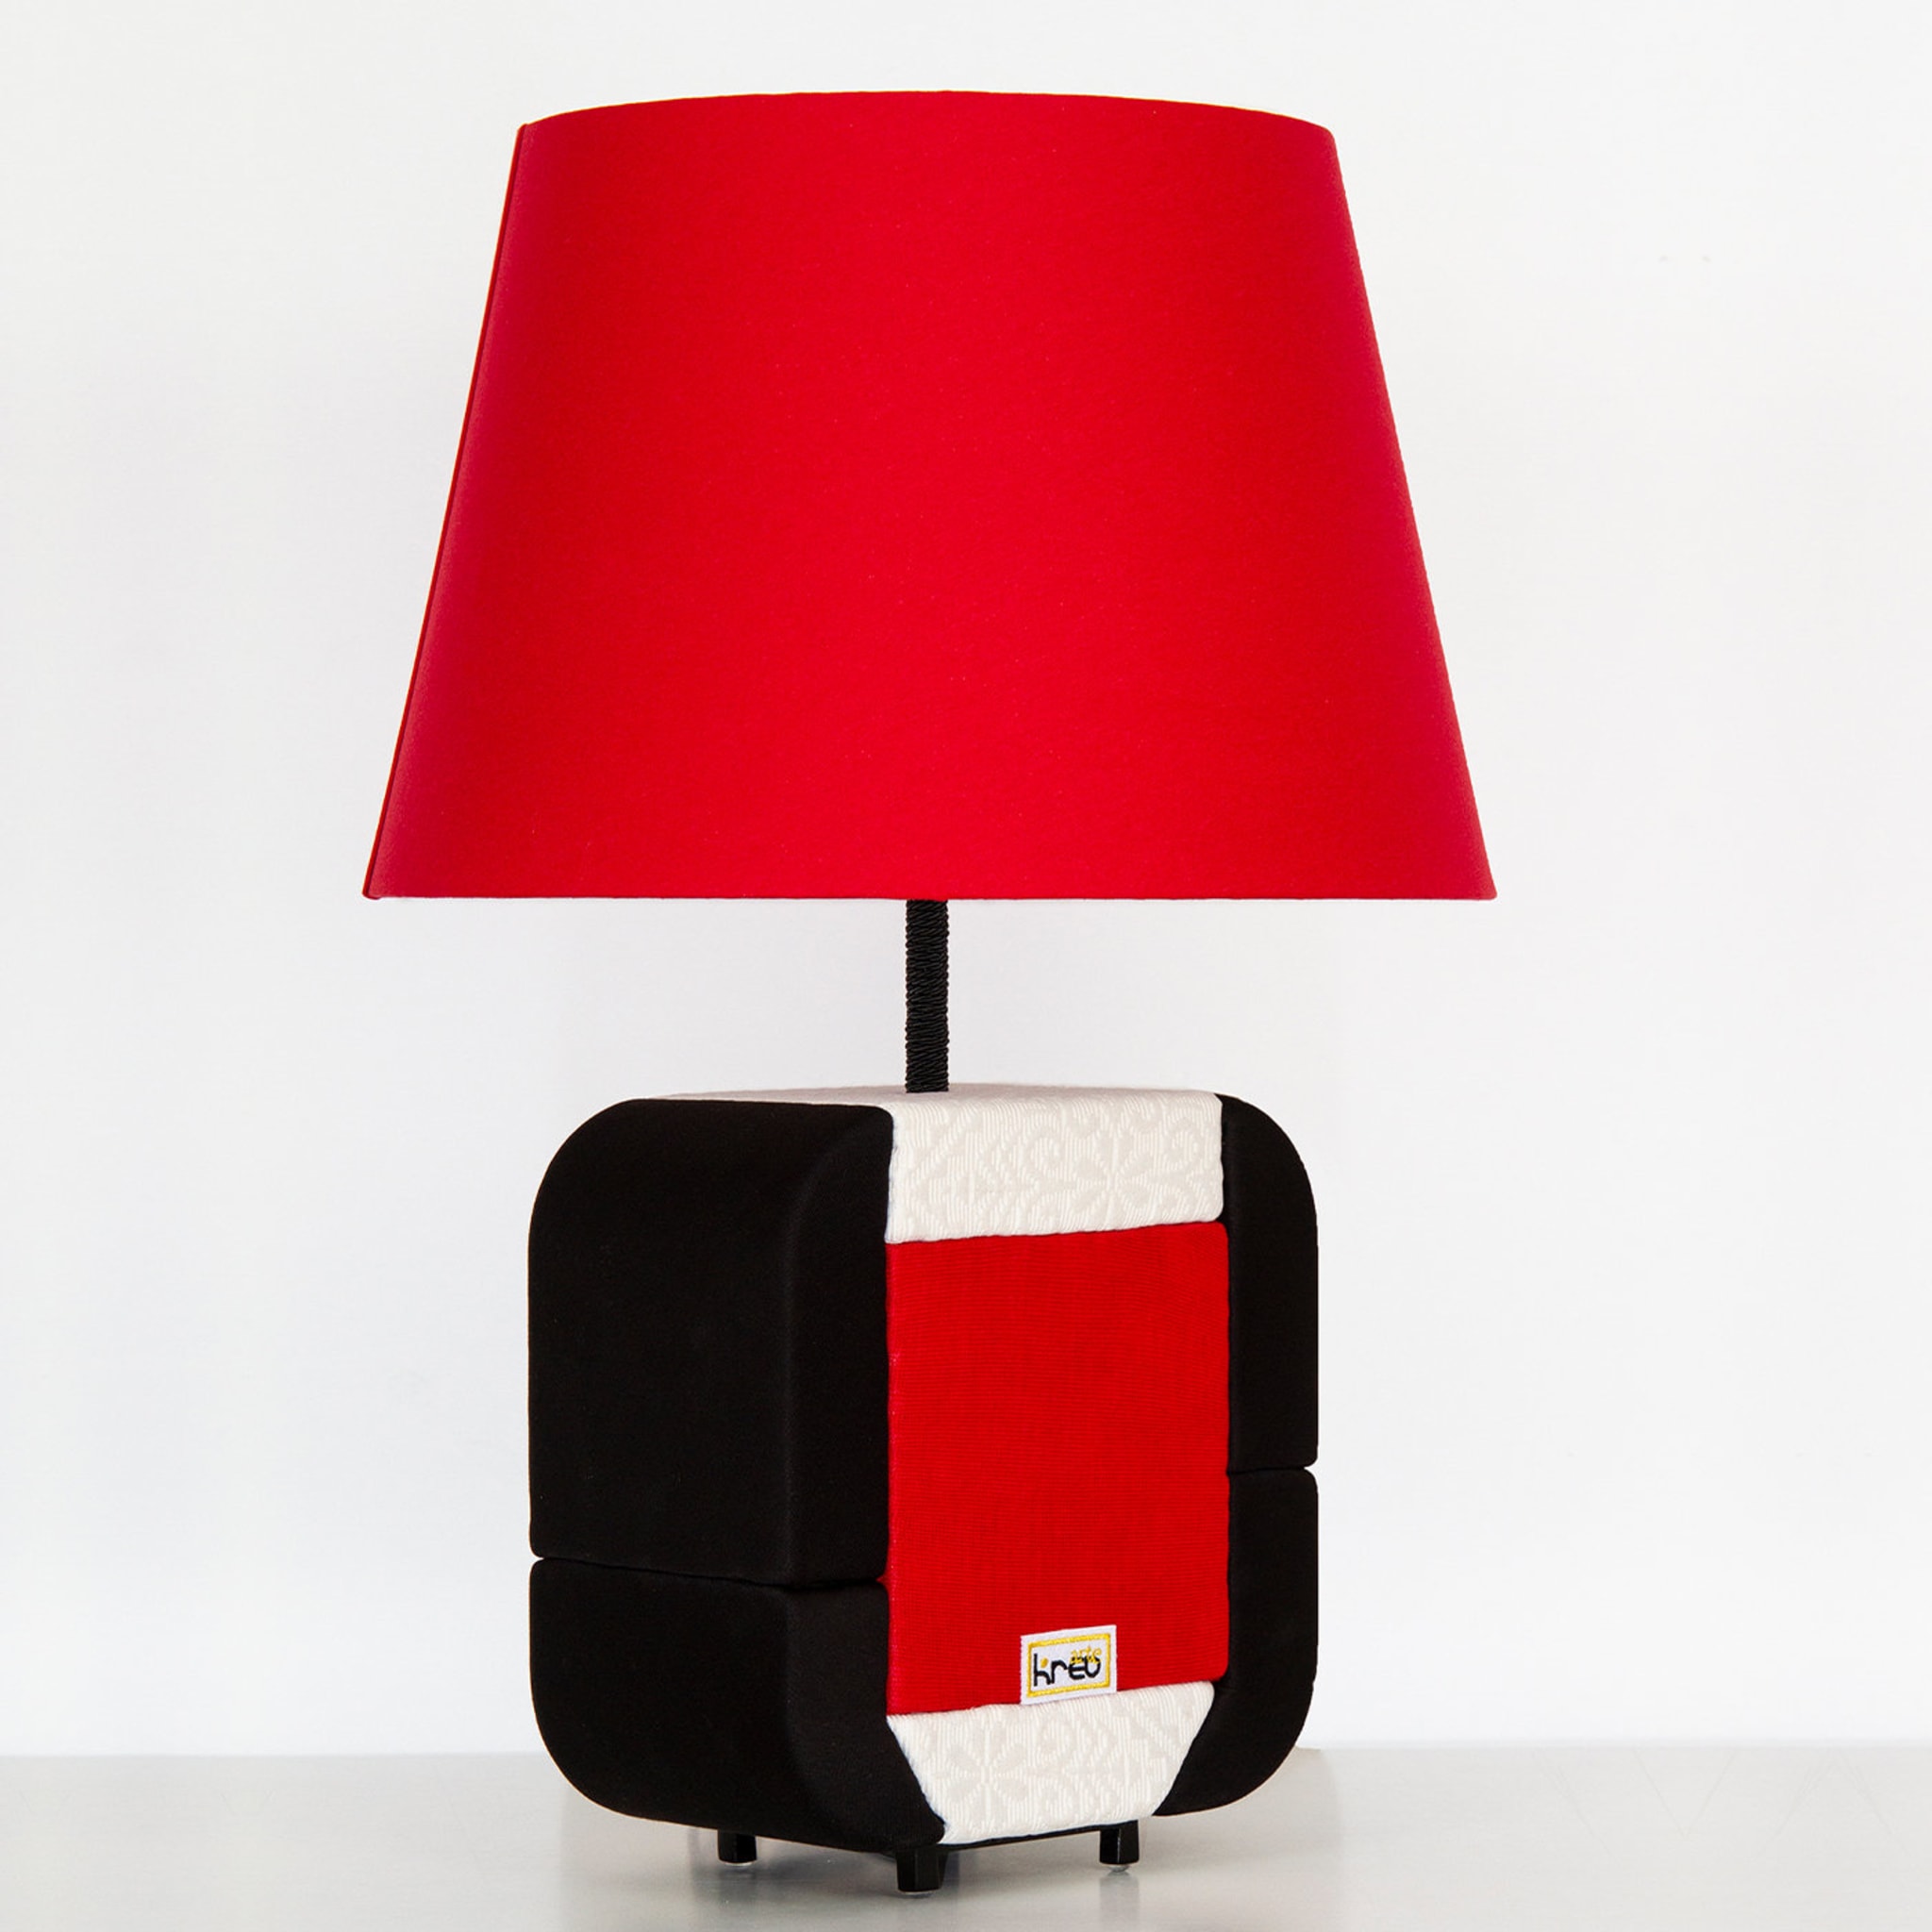 Red Flower Table Lamp - Alternative view 1